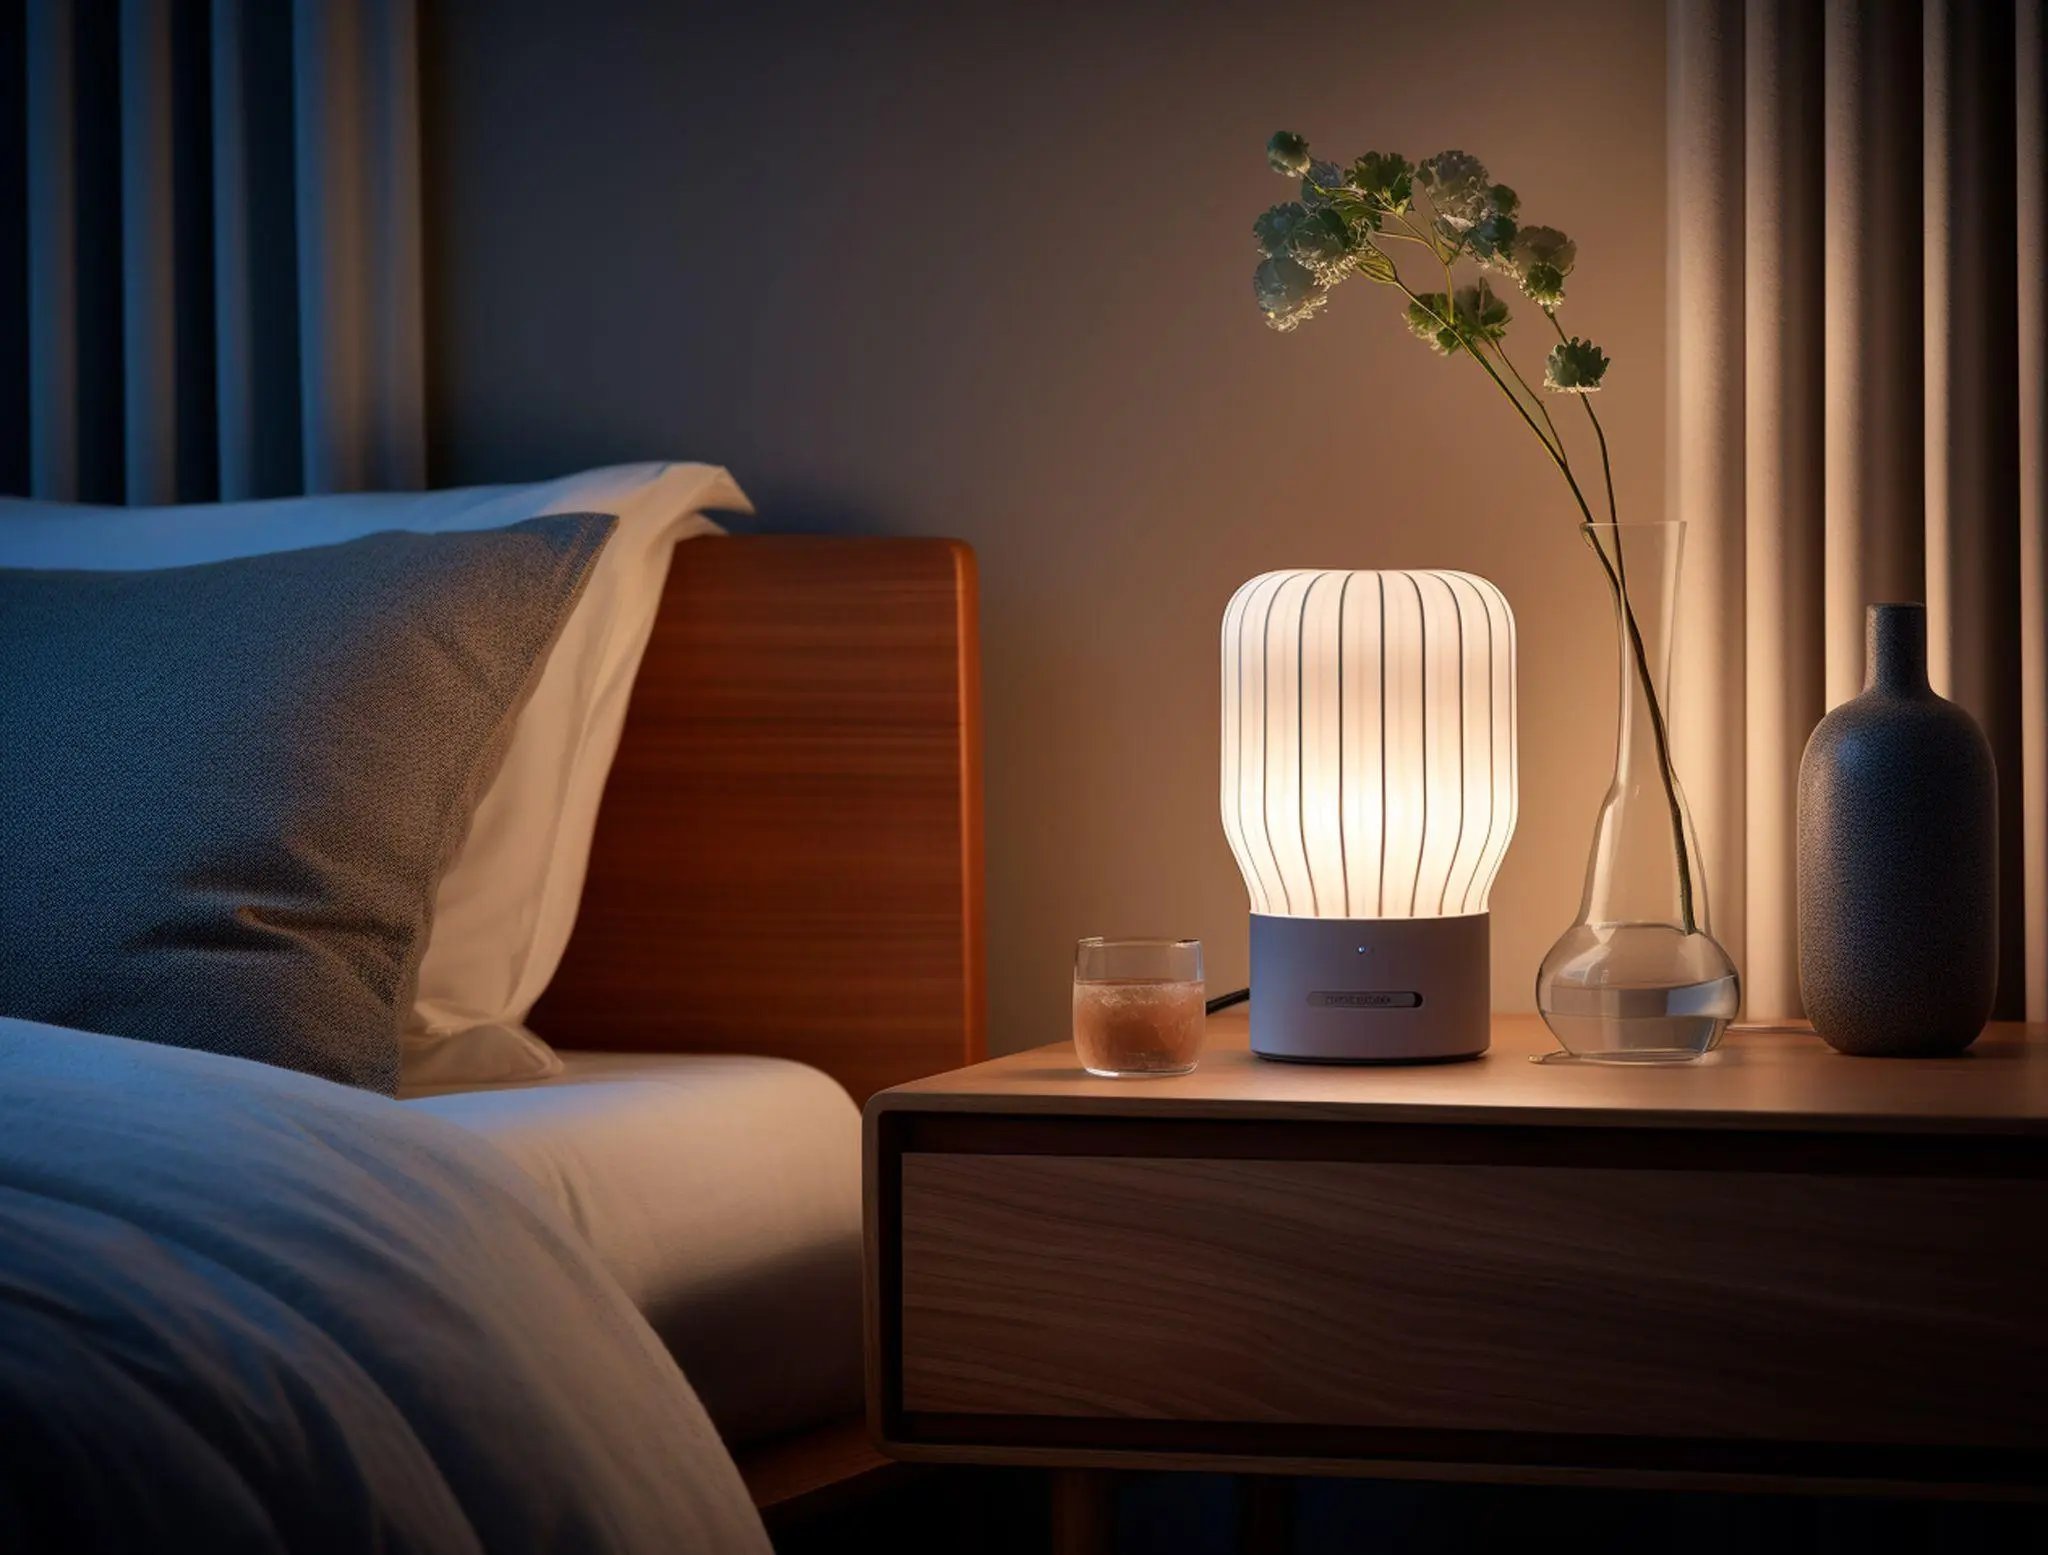 A close-up picture of a lamp on a nightstand